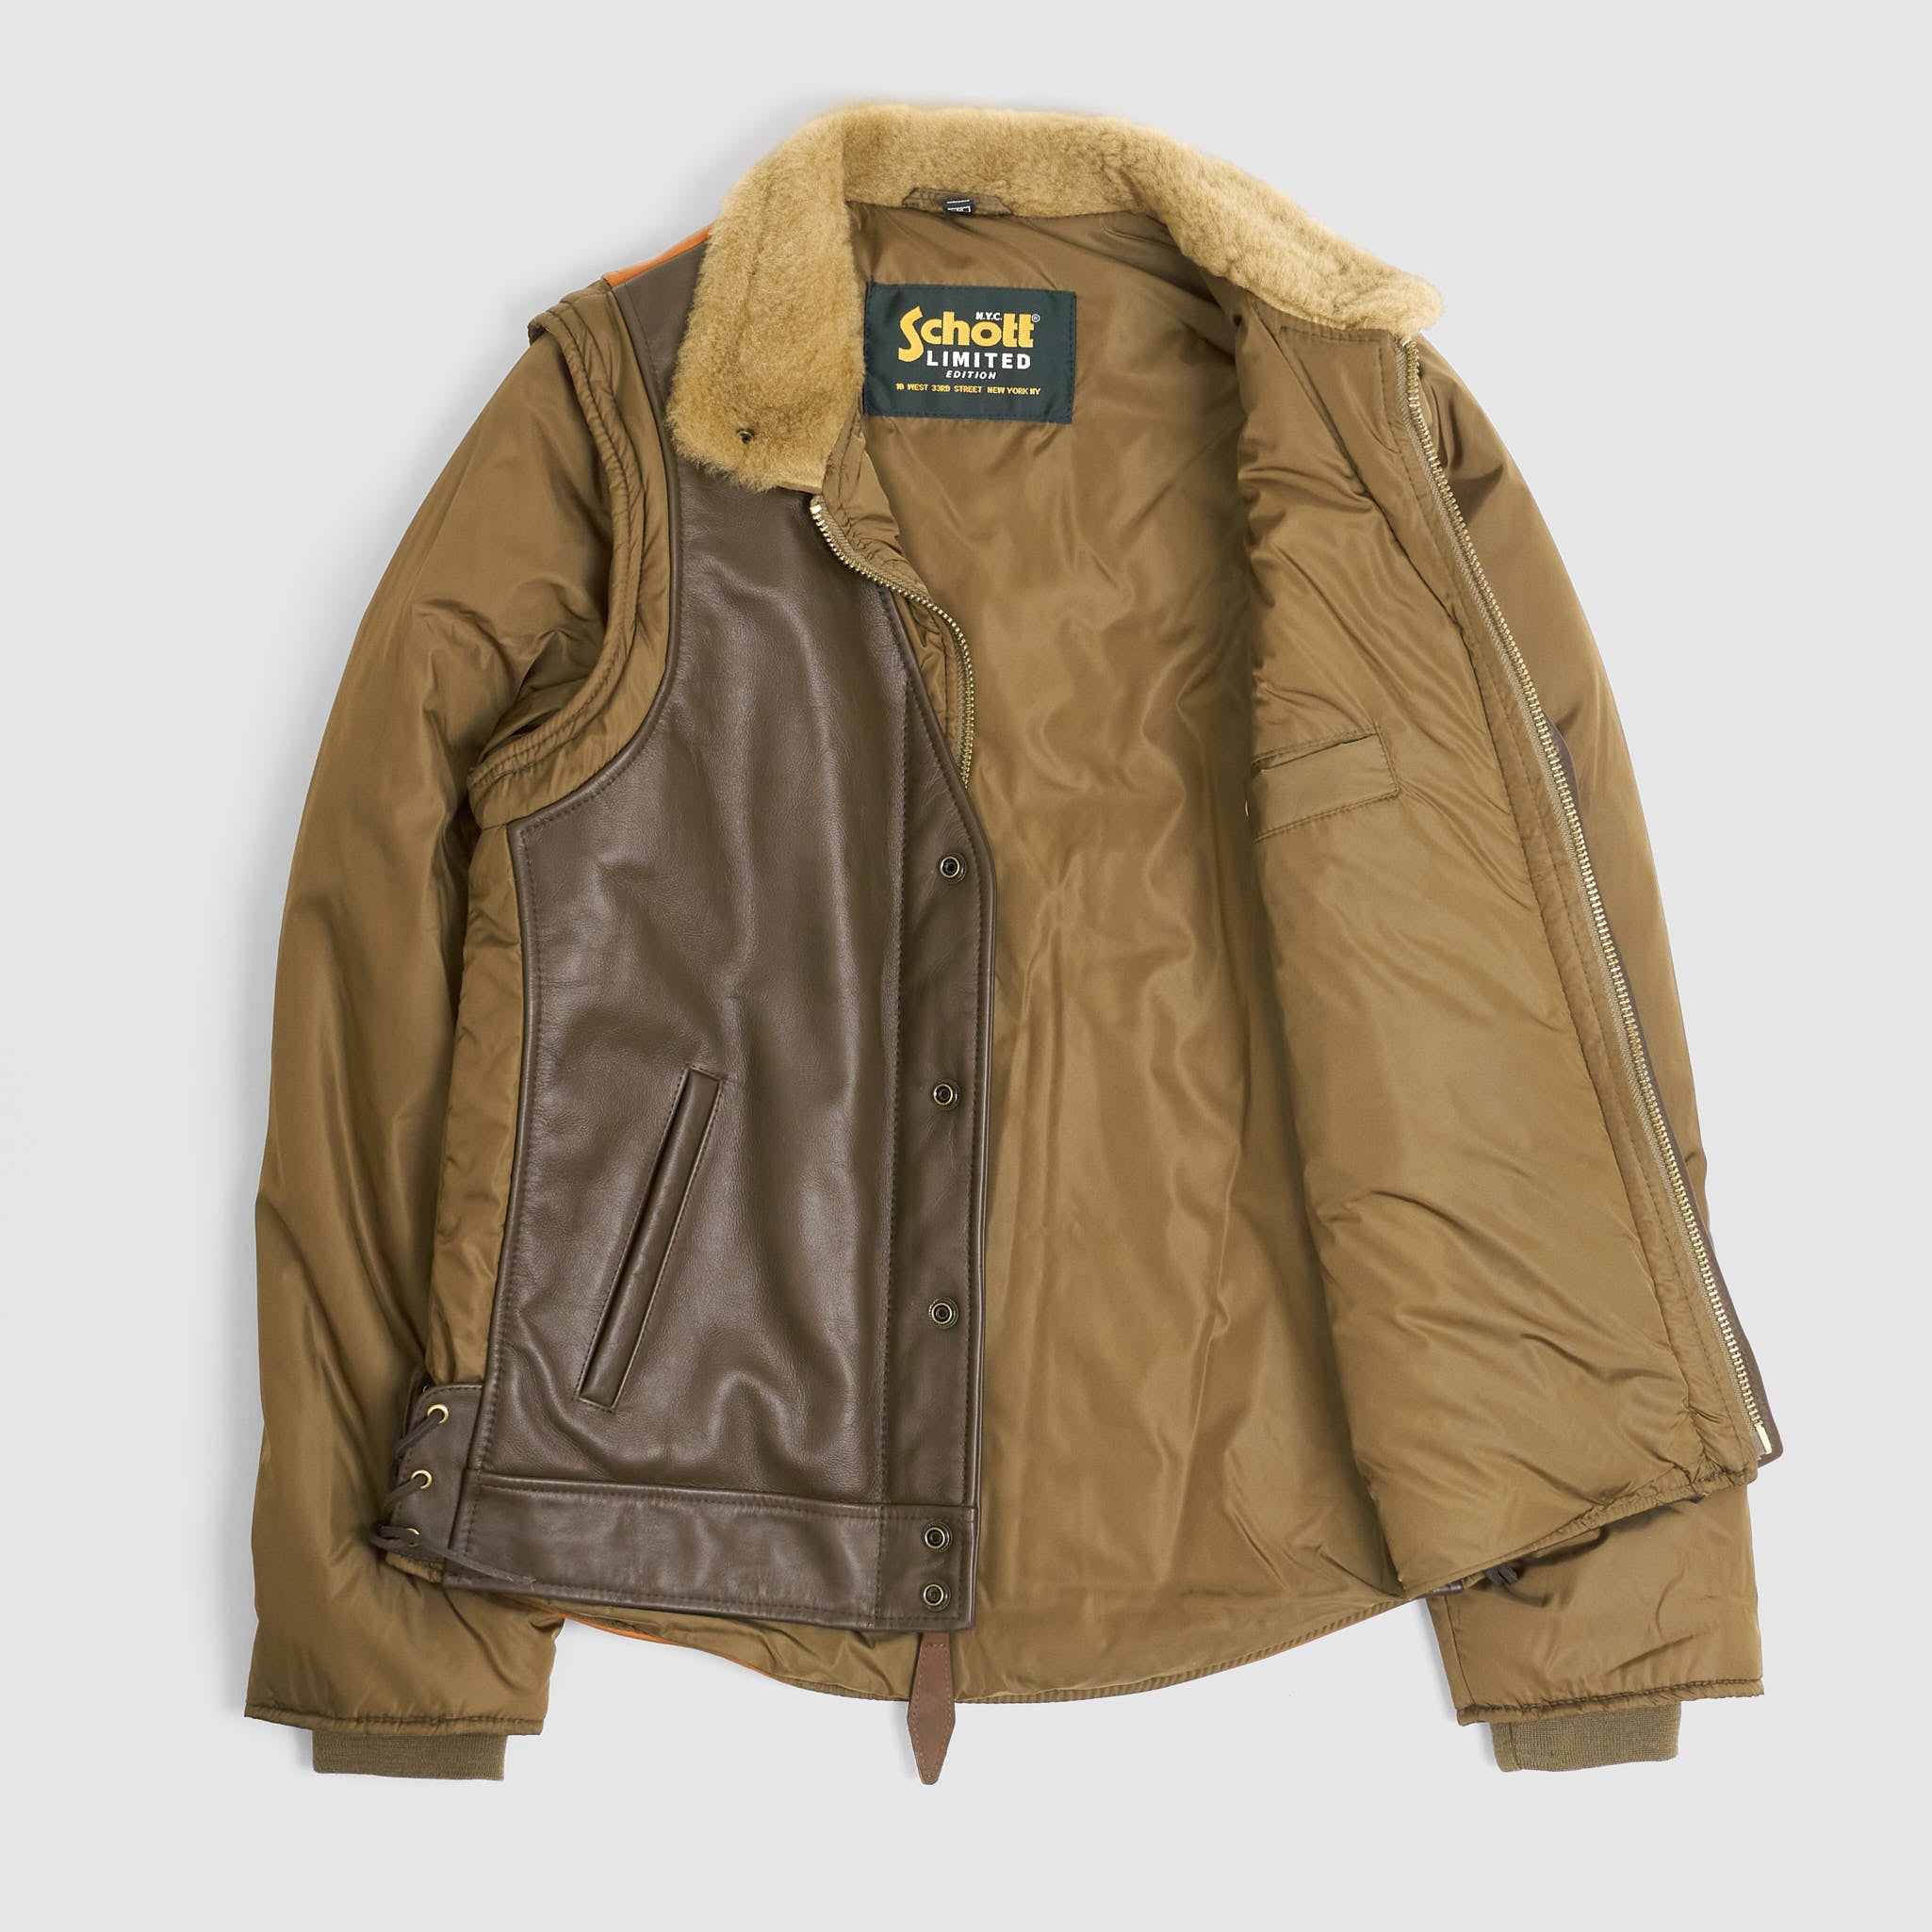 Schott N.Y.C. Padded Leather Jacket and Vest - DeeCee style